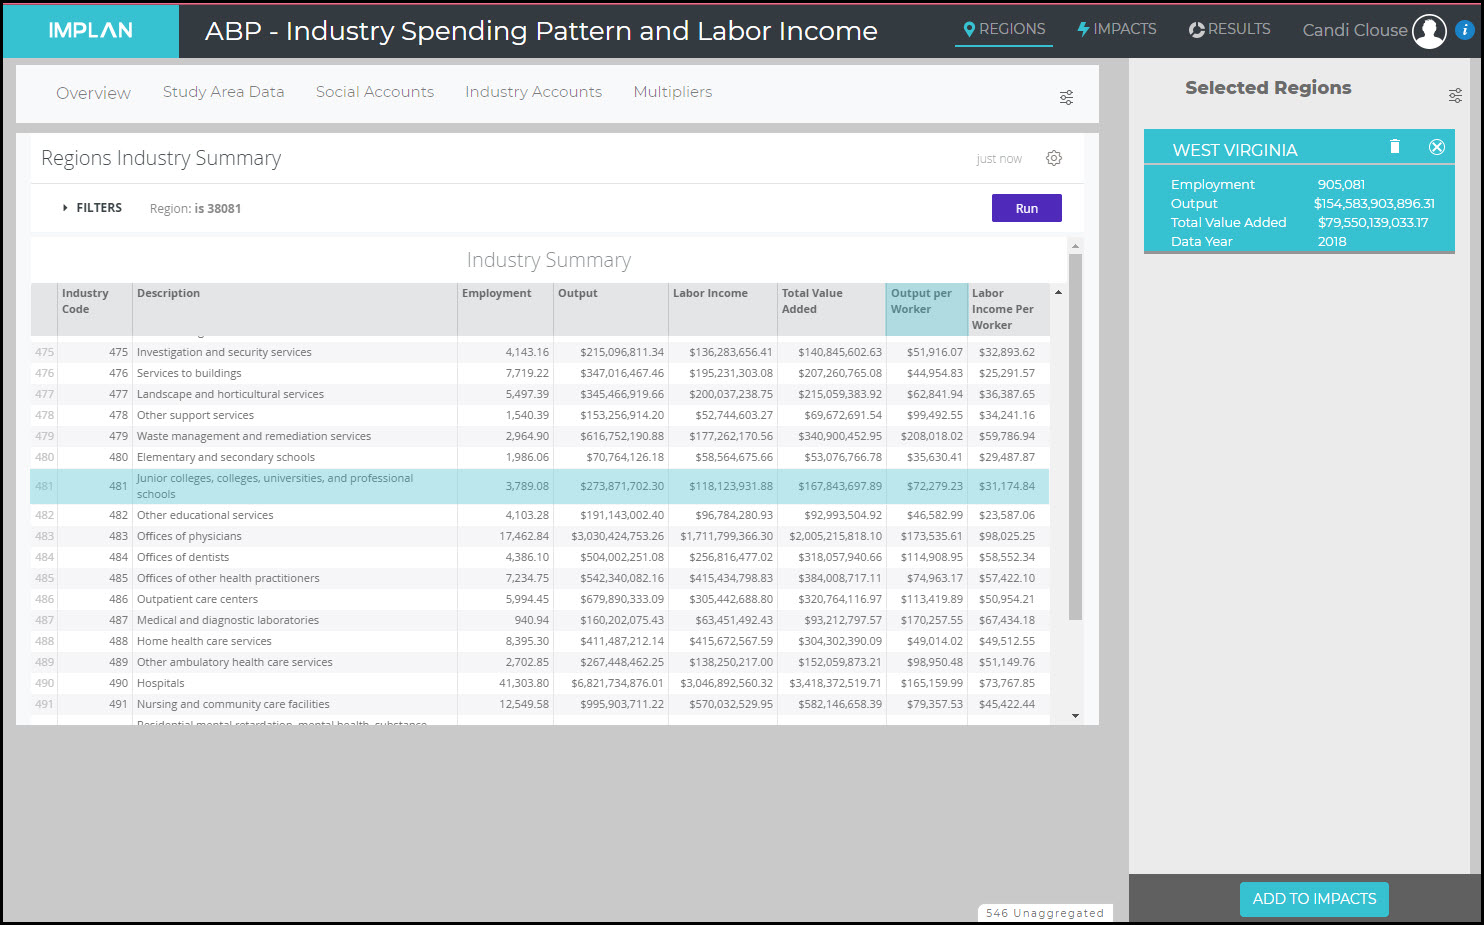 ABP_-_Industry_Spending_Pattern_and_Labor_Income_-_Industry_Summary.jpg